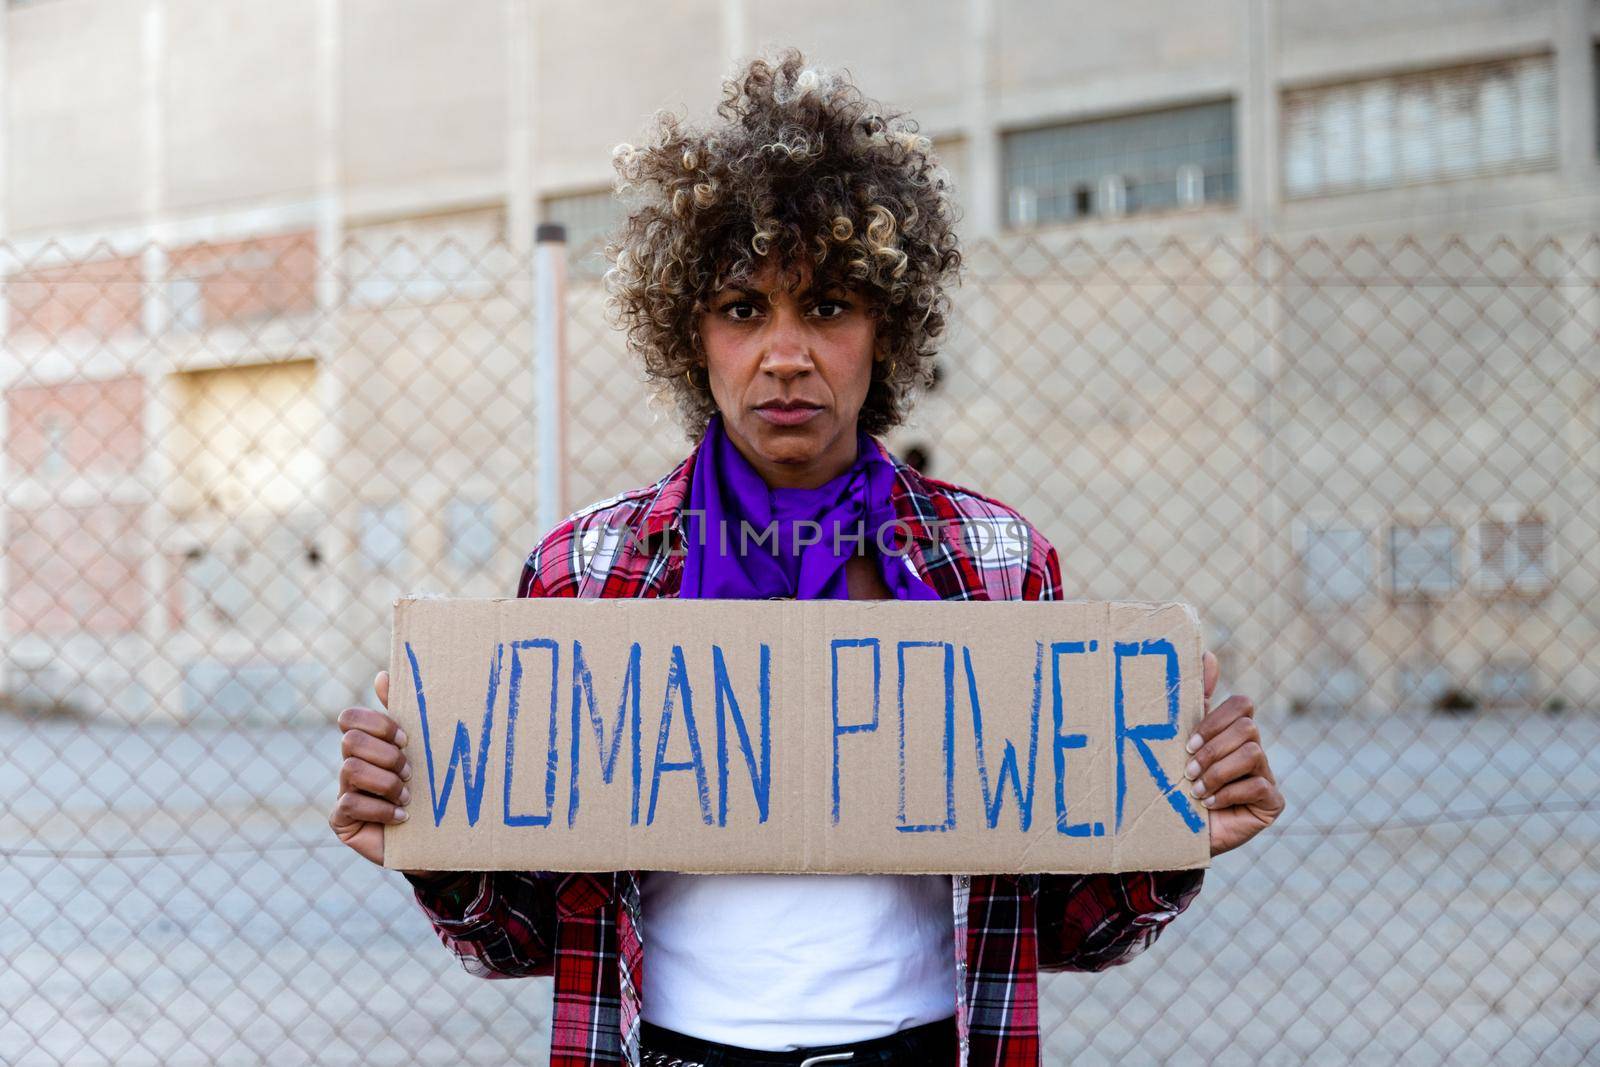 Confident African american demonstration protester looking at camera holding a woman power sign. Female empowerment concept.